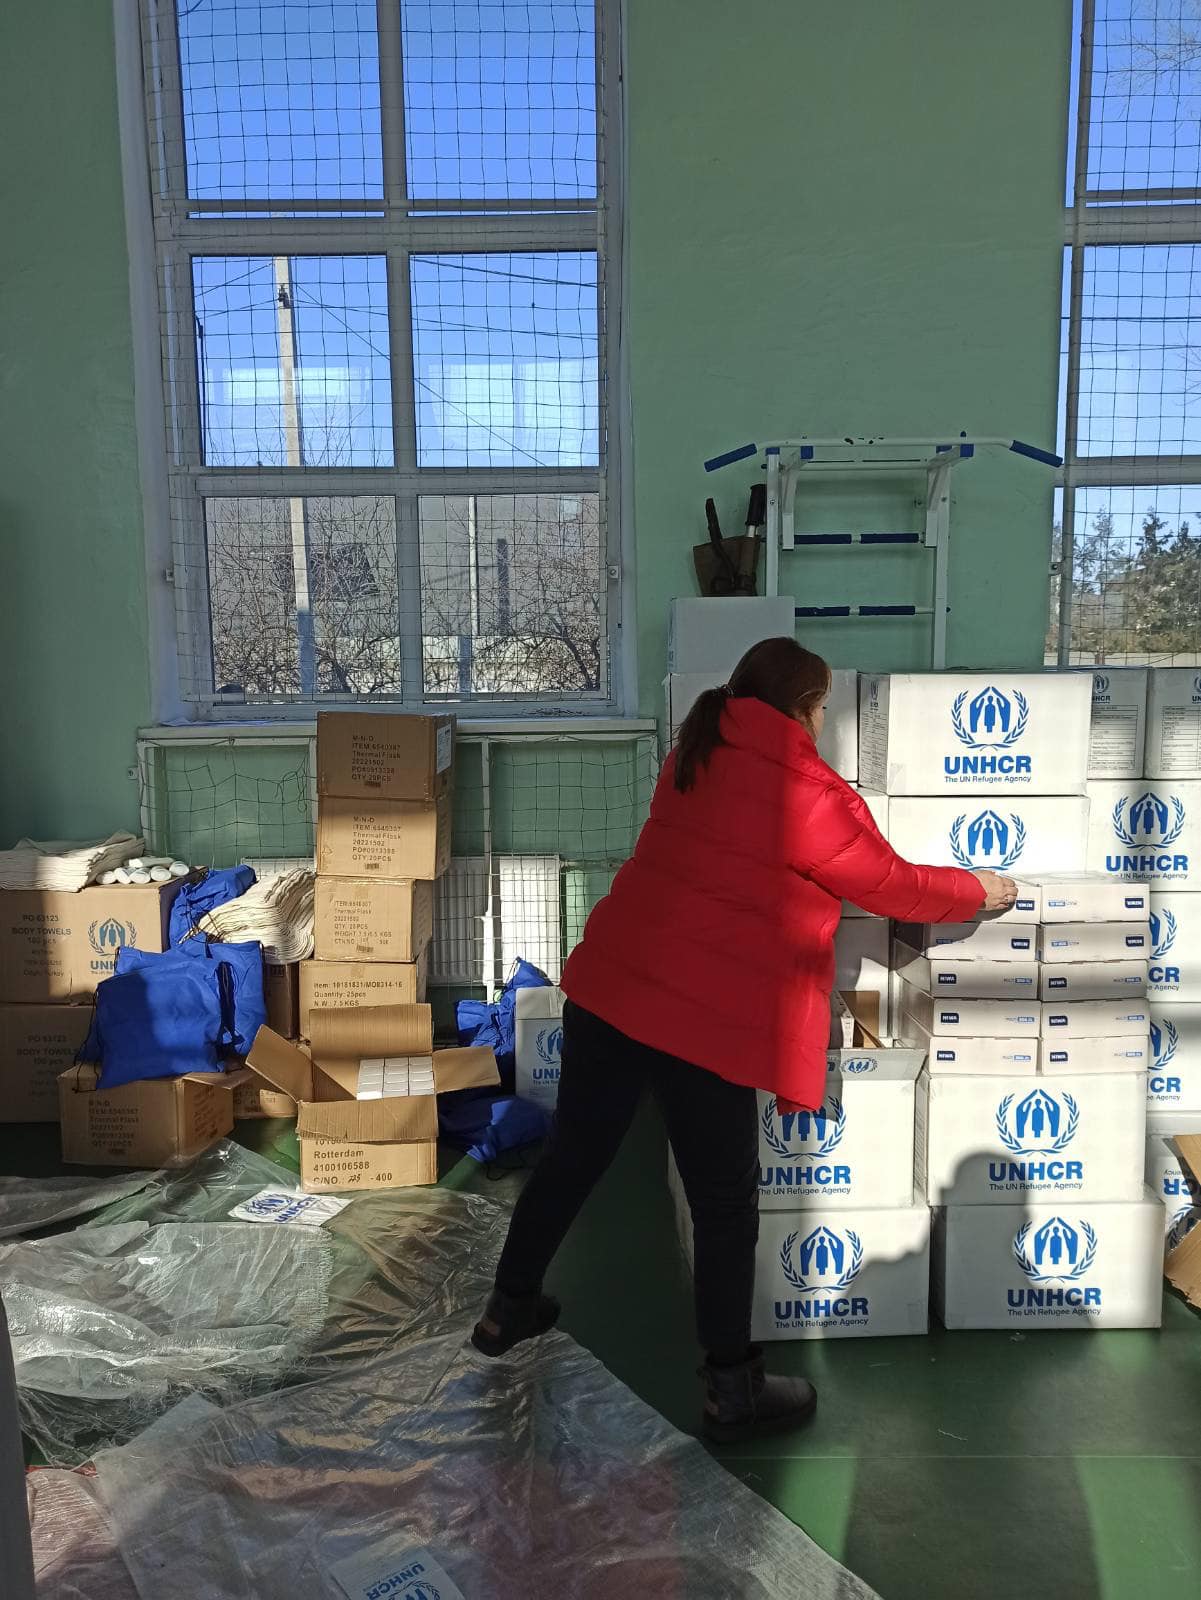 Humanitarian aid from the UNHCR